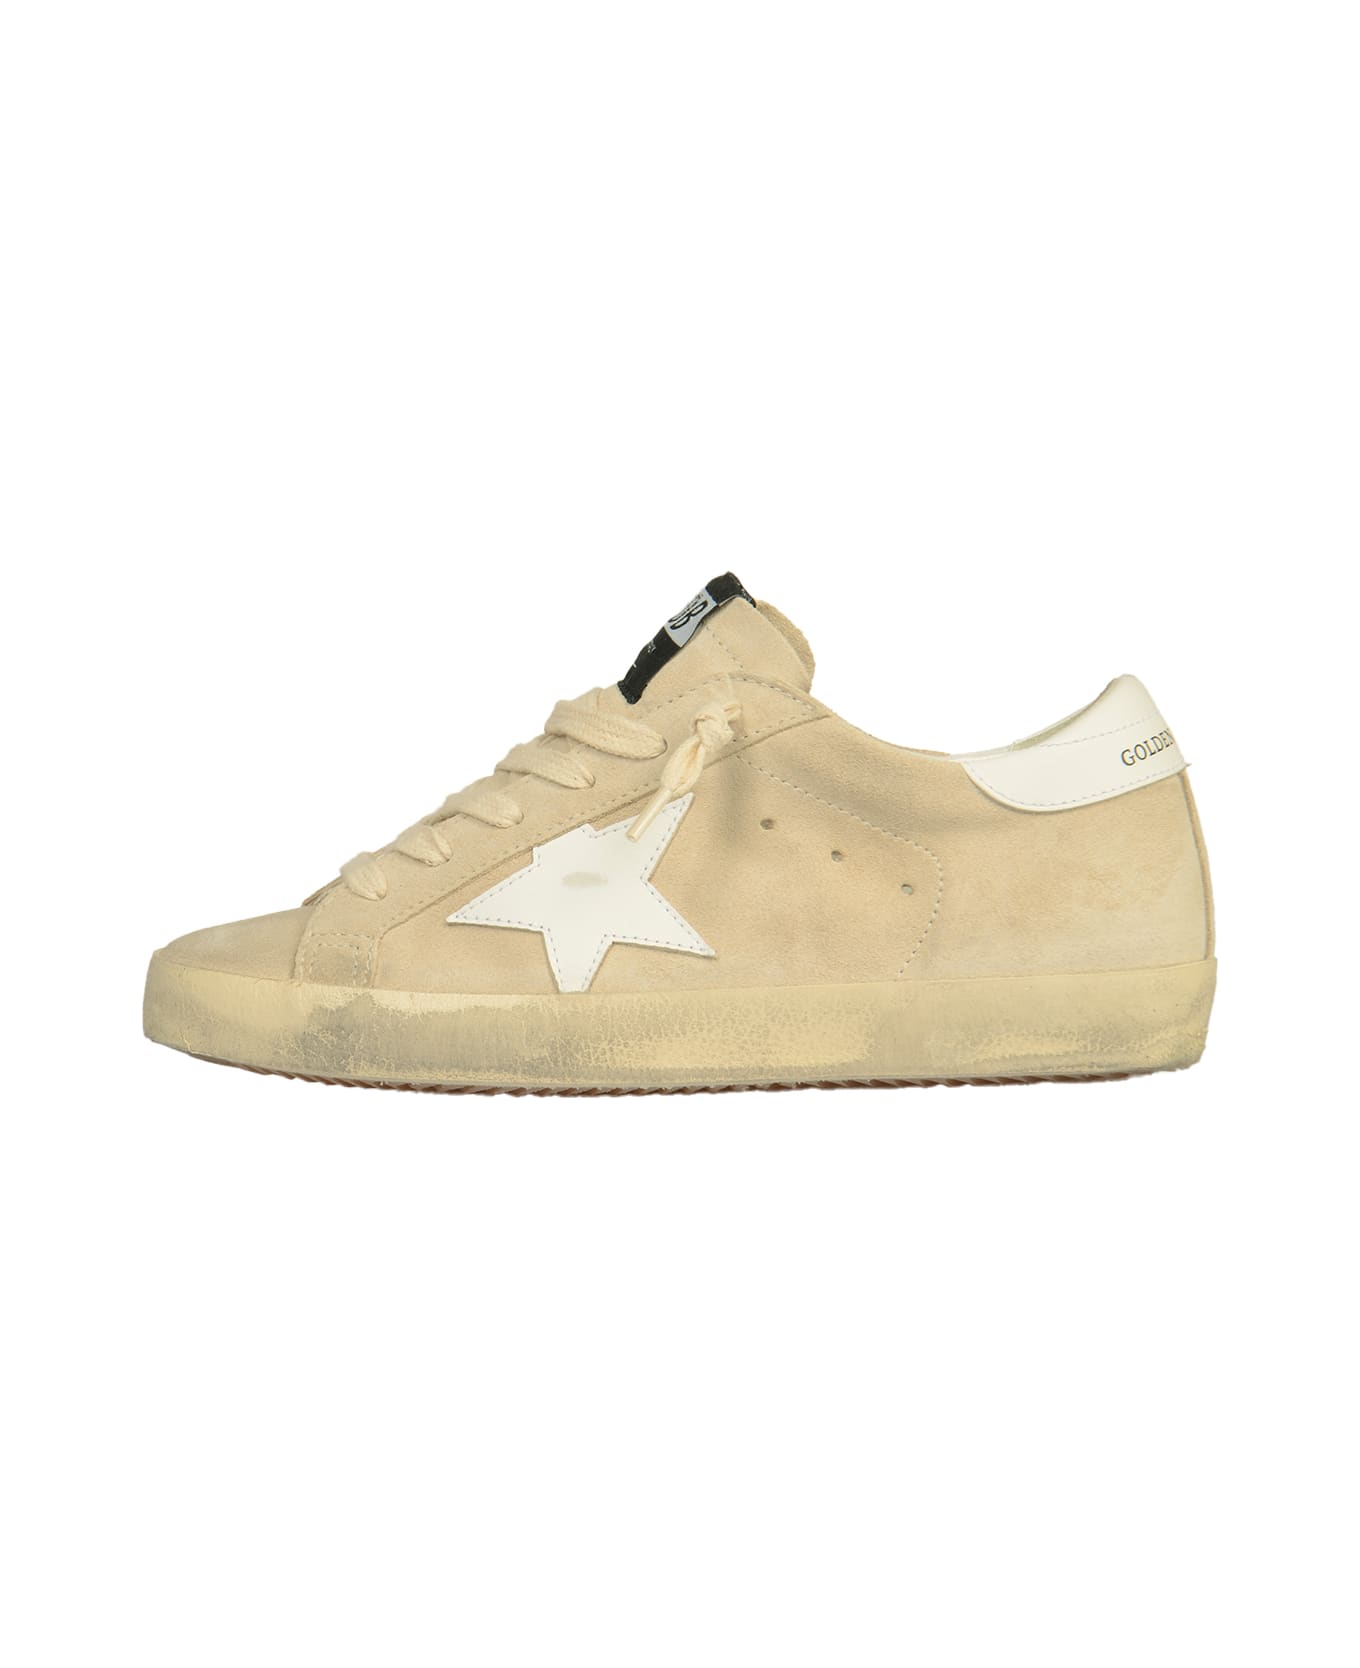 Golden Goose Super-star Classic Sneakers - Seed Pearl/White